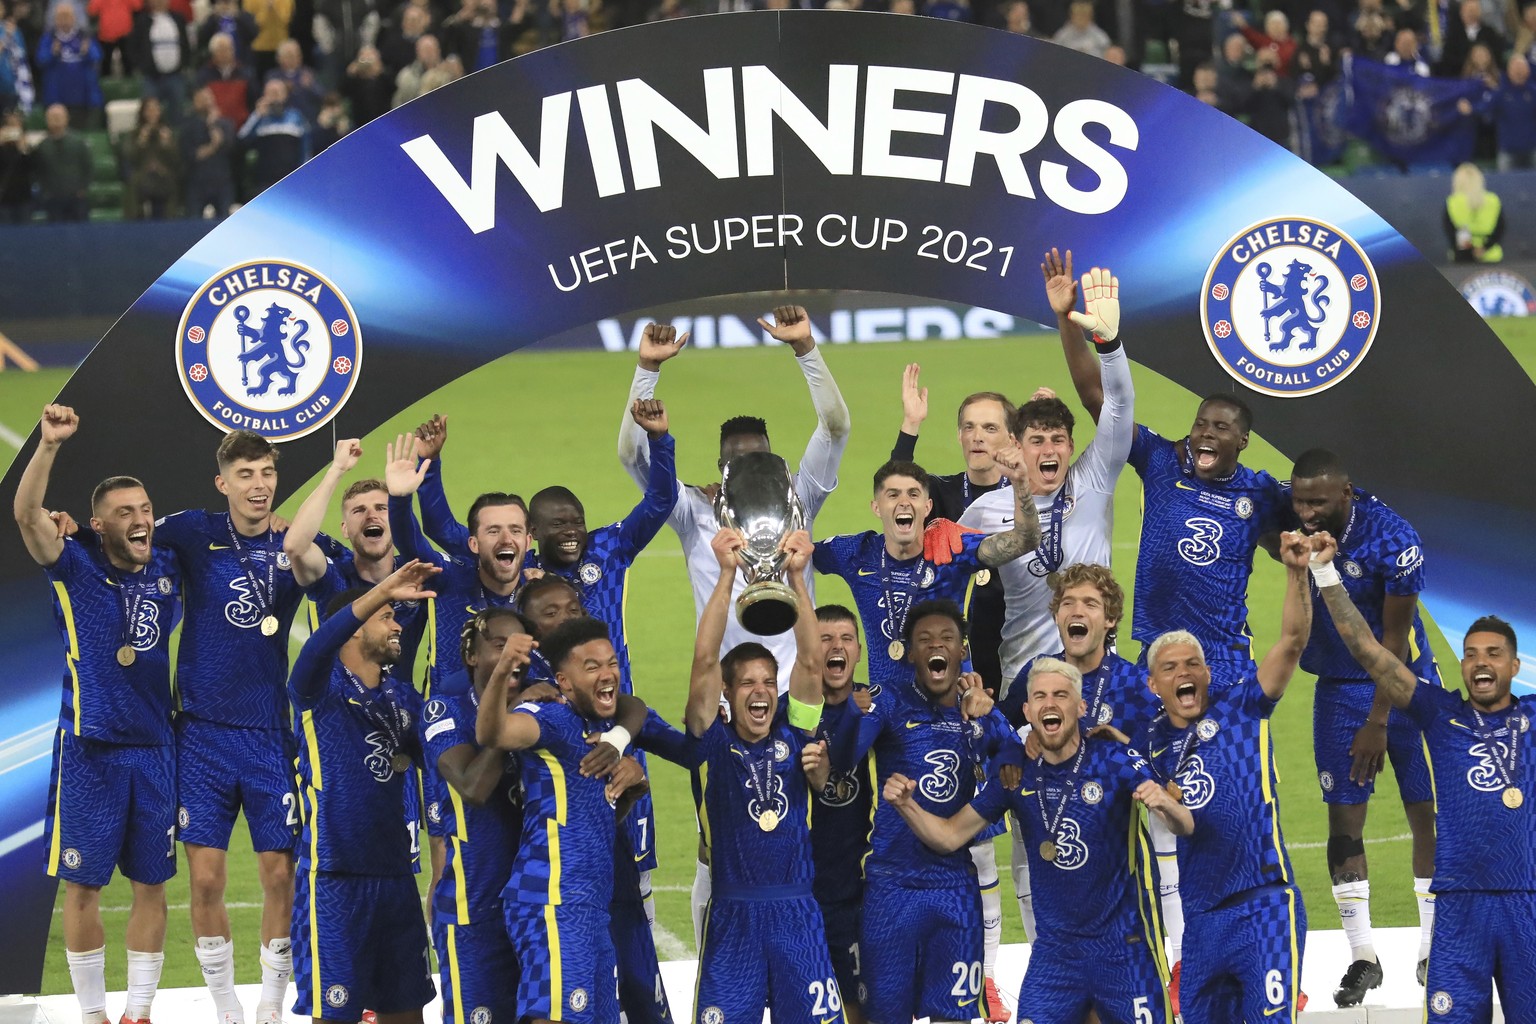 Chelsea players celebrate with the trophy after winning the UEFA Super Cup soccer match against Villarreal at Windsor Park in Belfast, Northern Ireland, Wednesday, Aug. 11, 2021. (AP Photo/Peter Morri ...